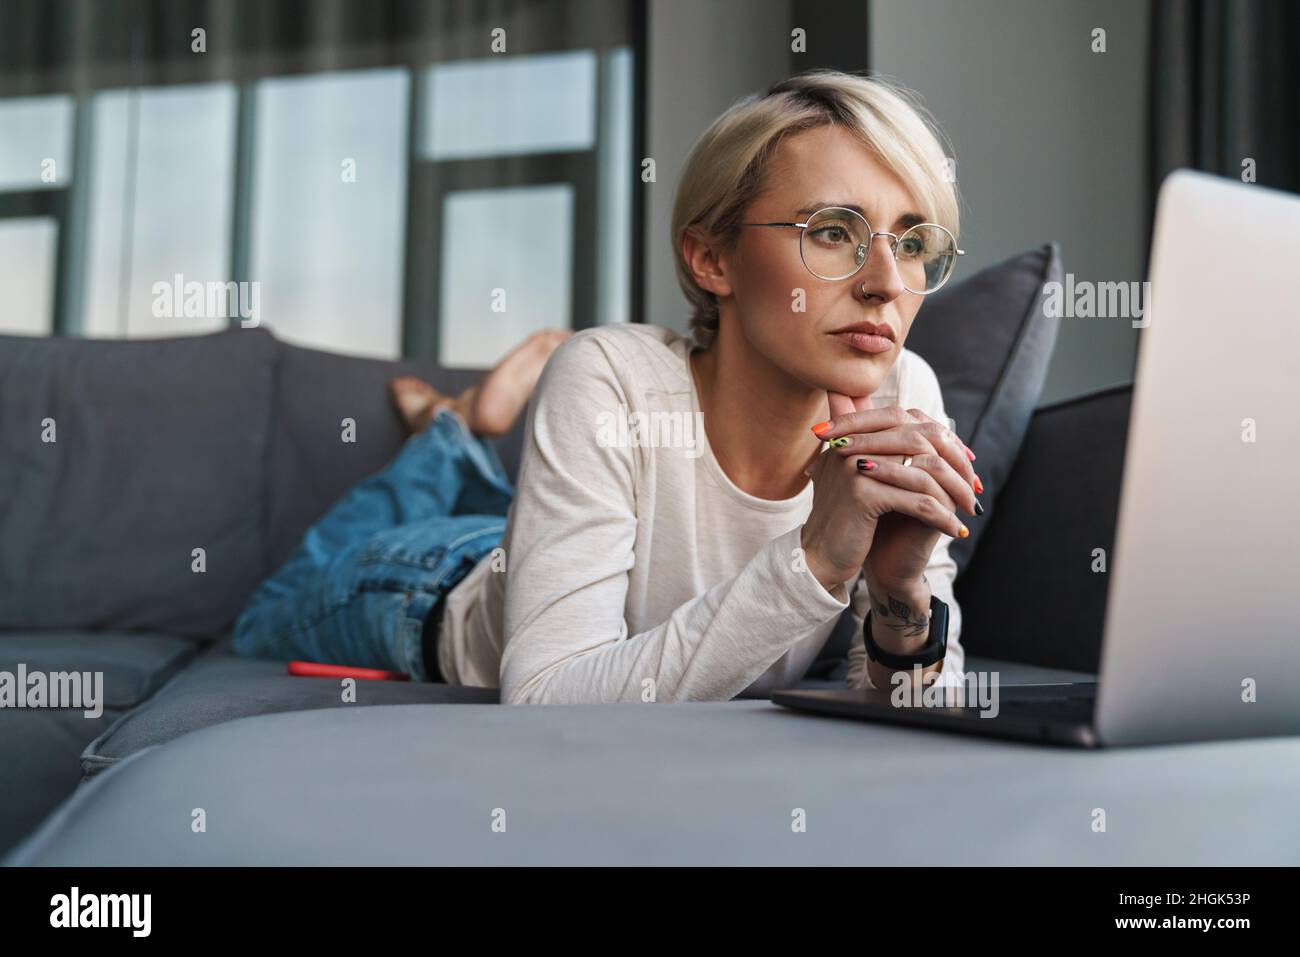 Upset frustrated mid aged blonde woman looking at laptop comouter screen on a couch at home Stock Photo